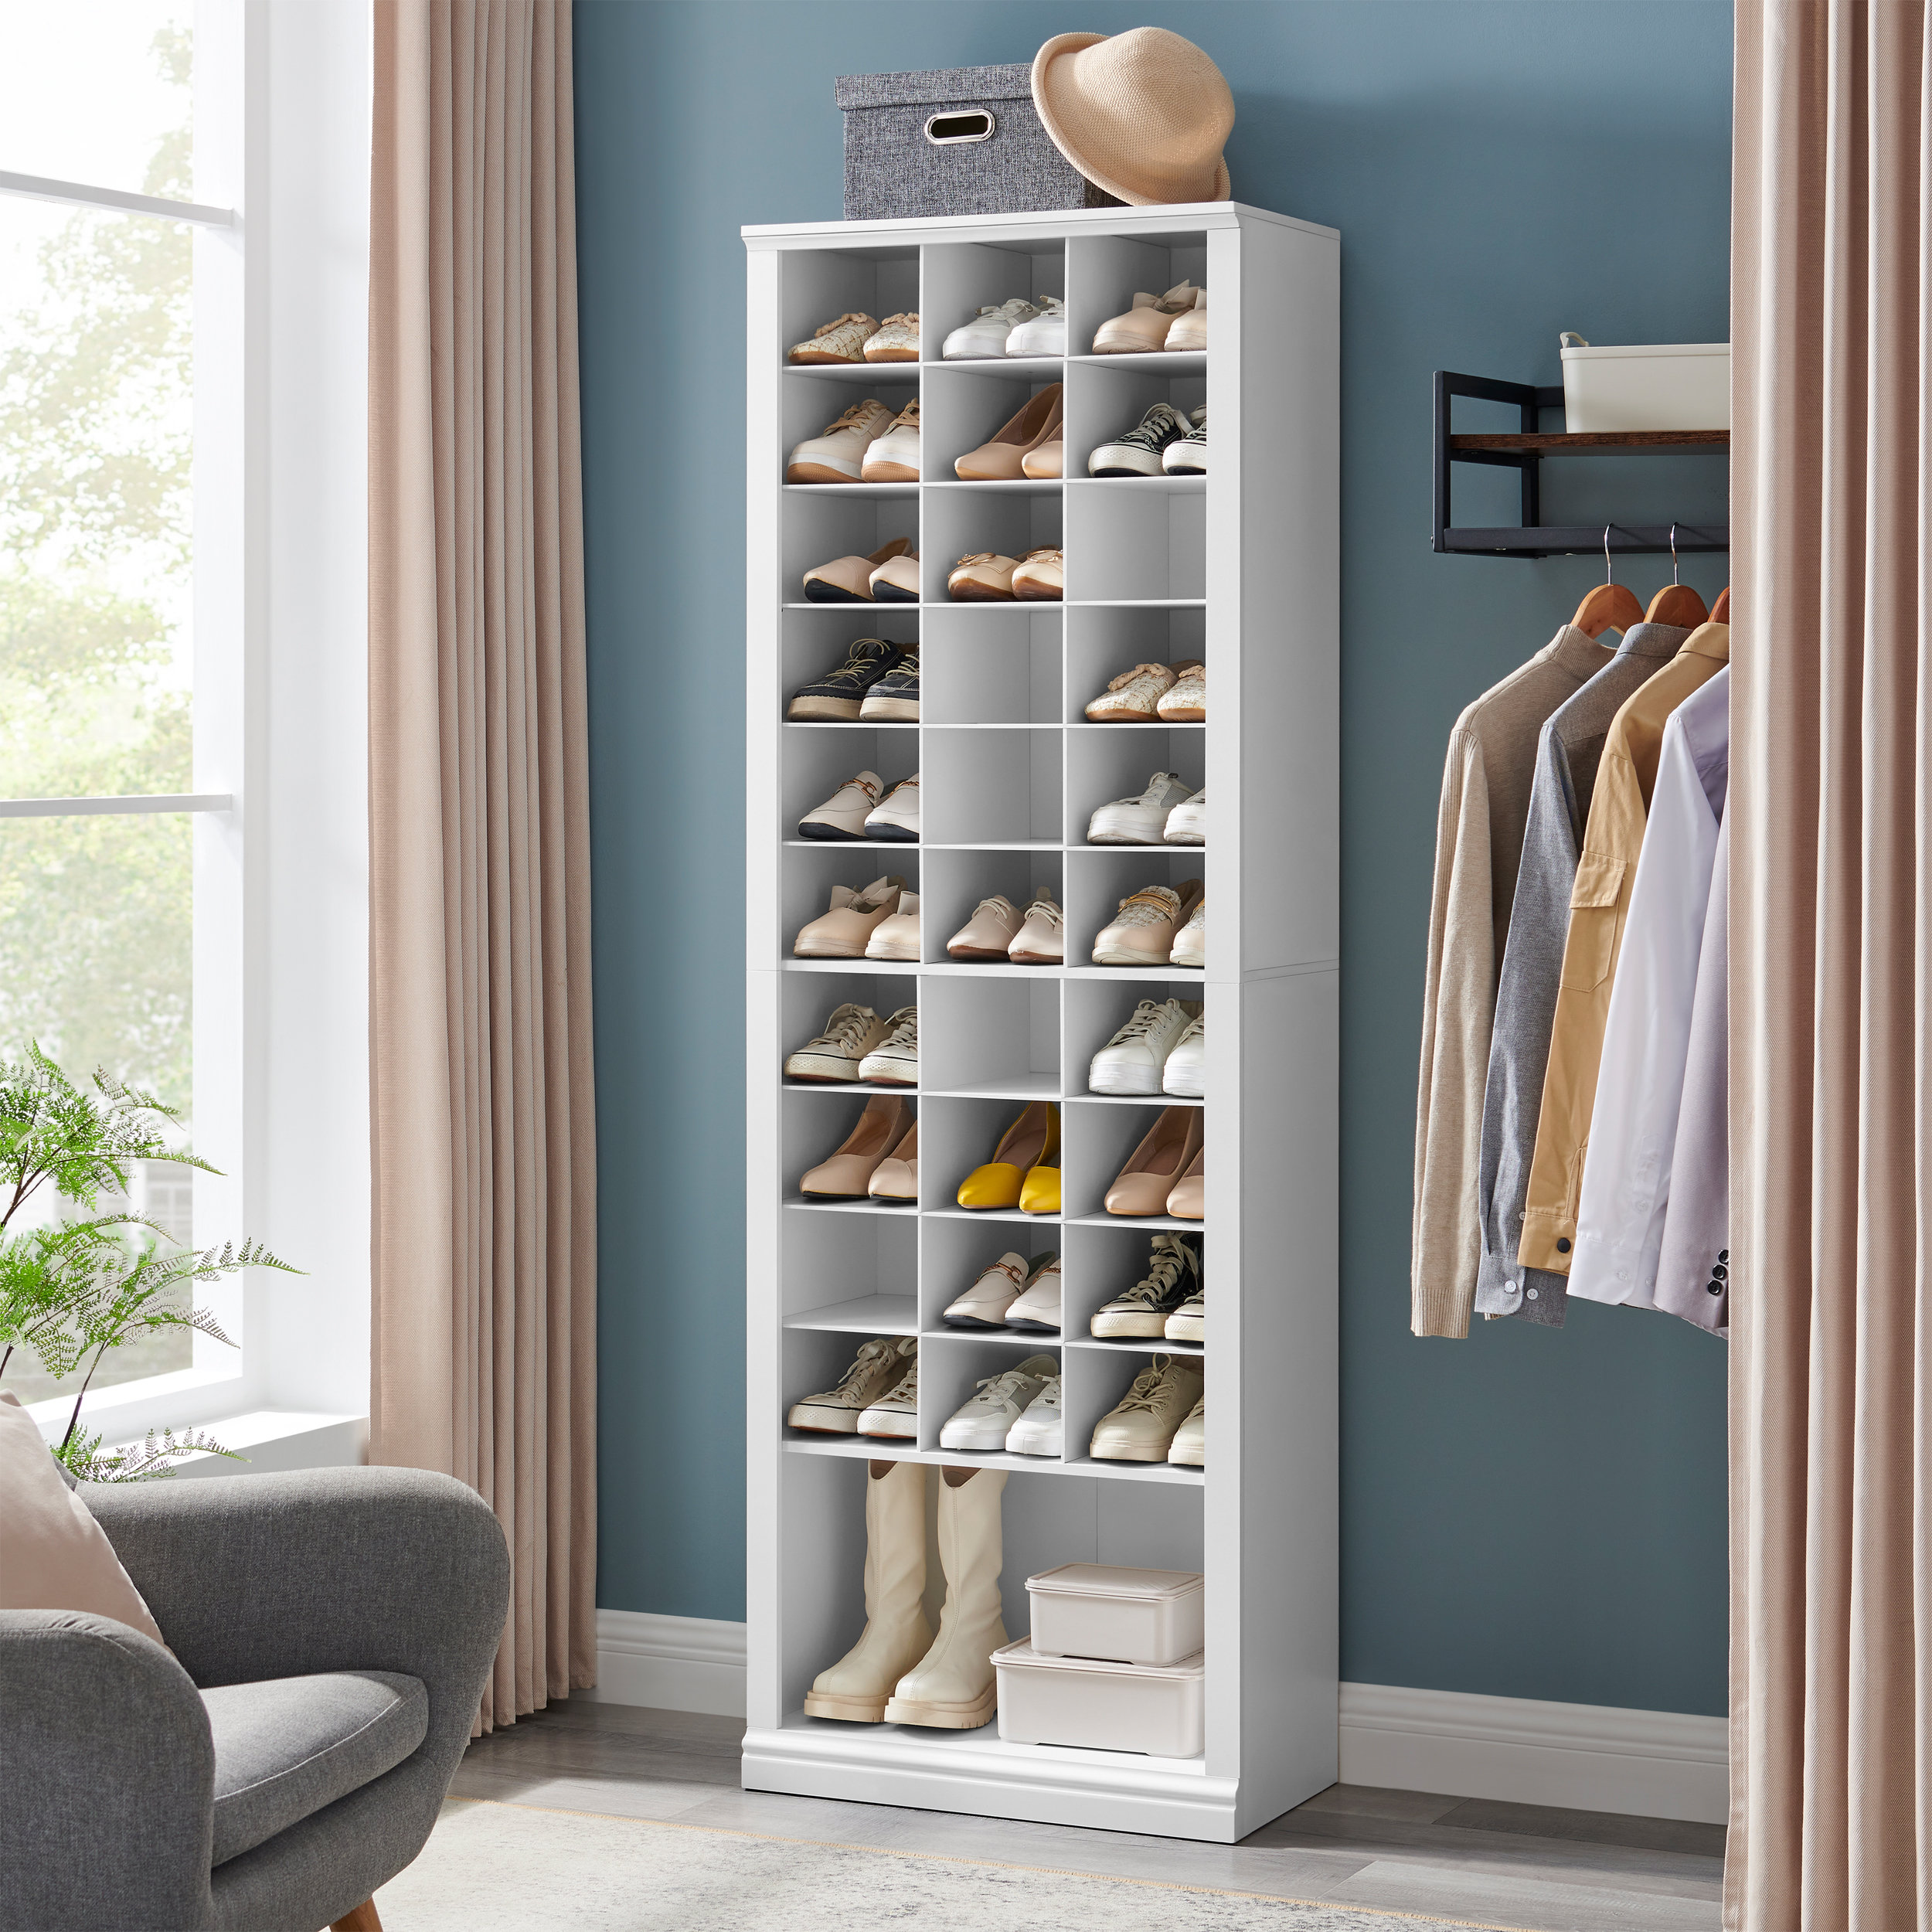 Styling A Small Space Or Office By Re-purposing An IKEA Mud Room Shoe  Cabinet For Filing & Storage